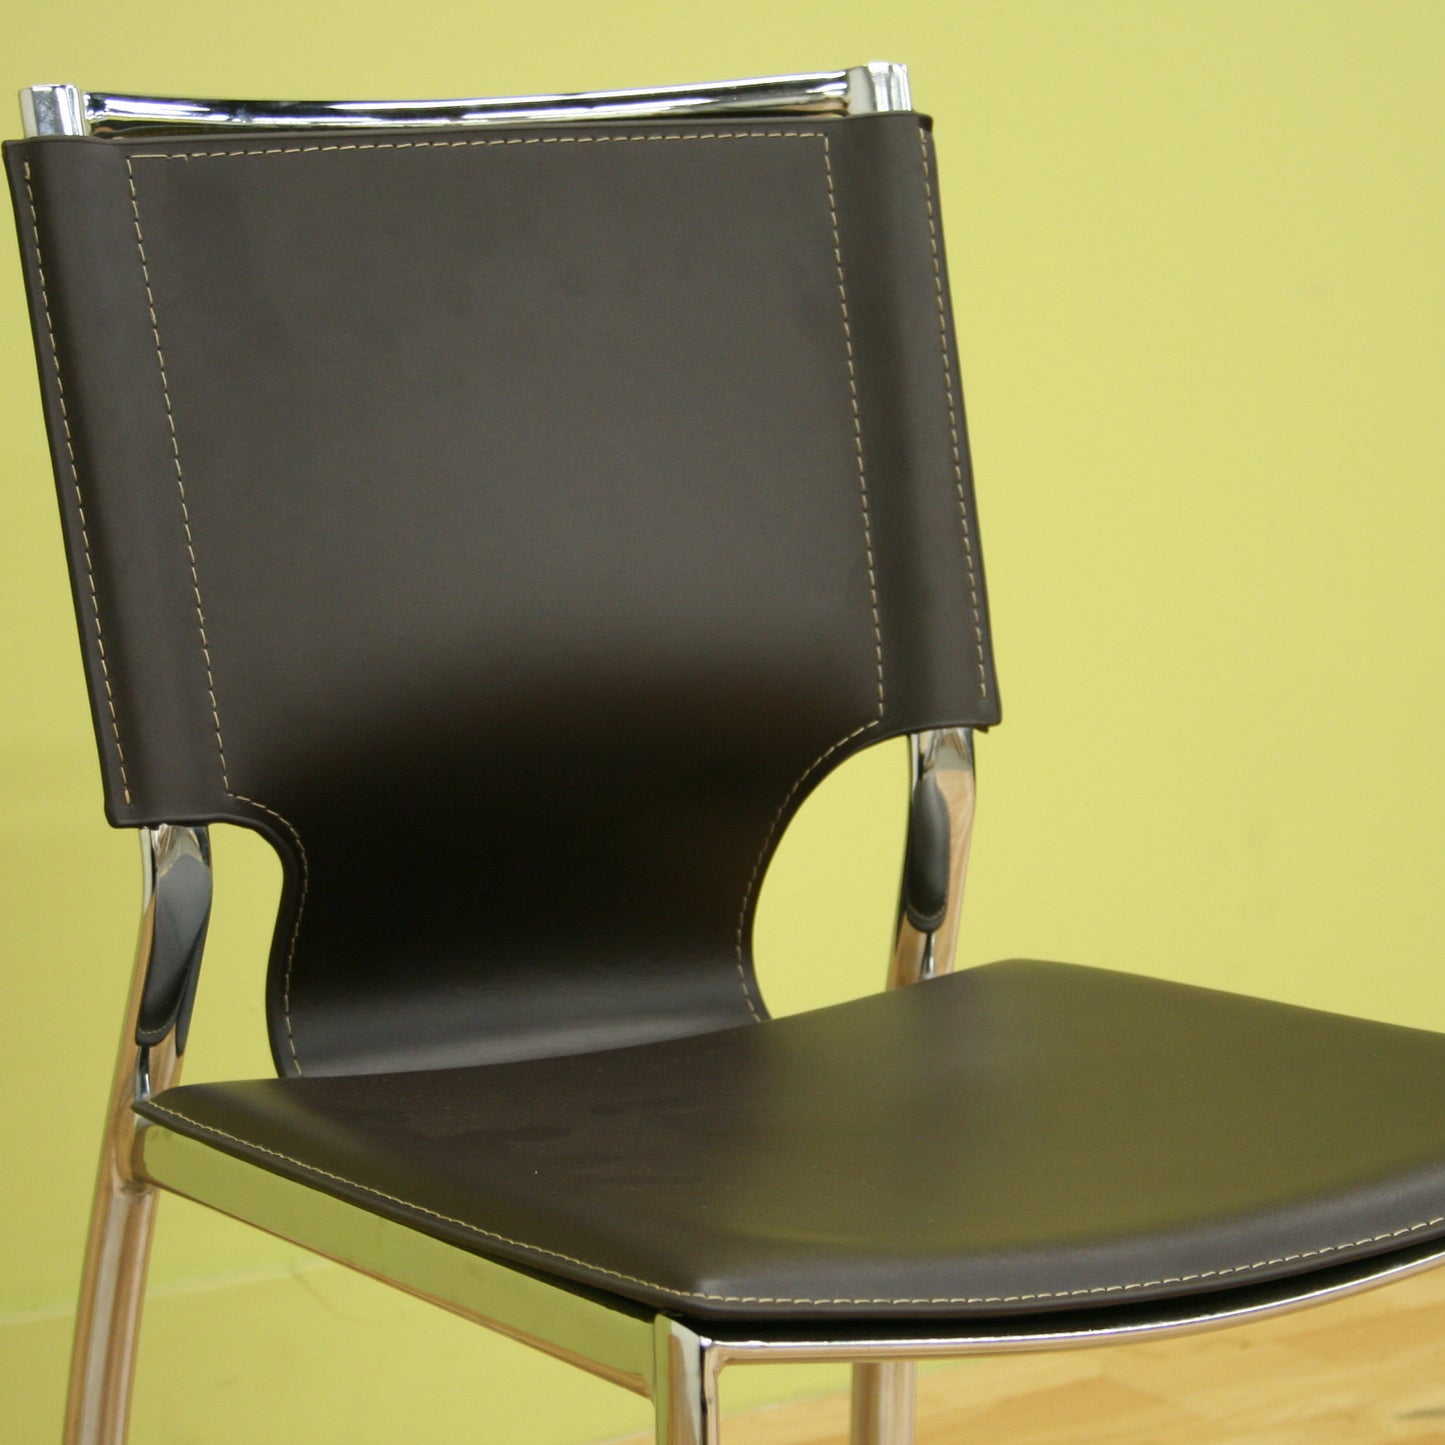 Modern 2 Stainless Steel Dining Chairs in Brown Faux Leather Seat